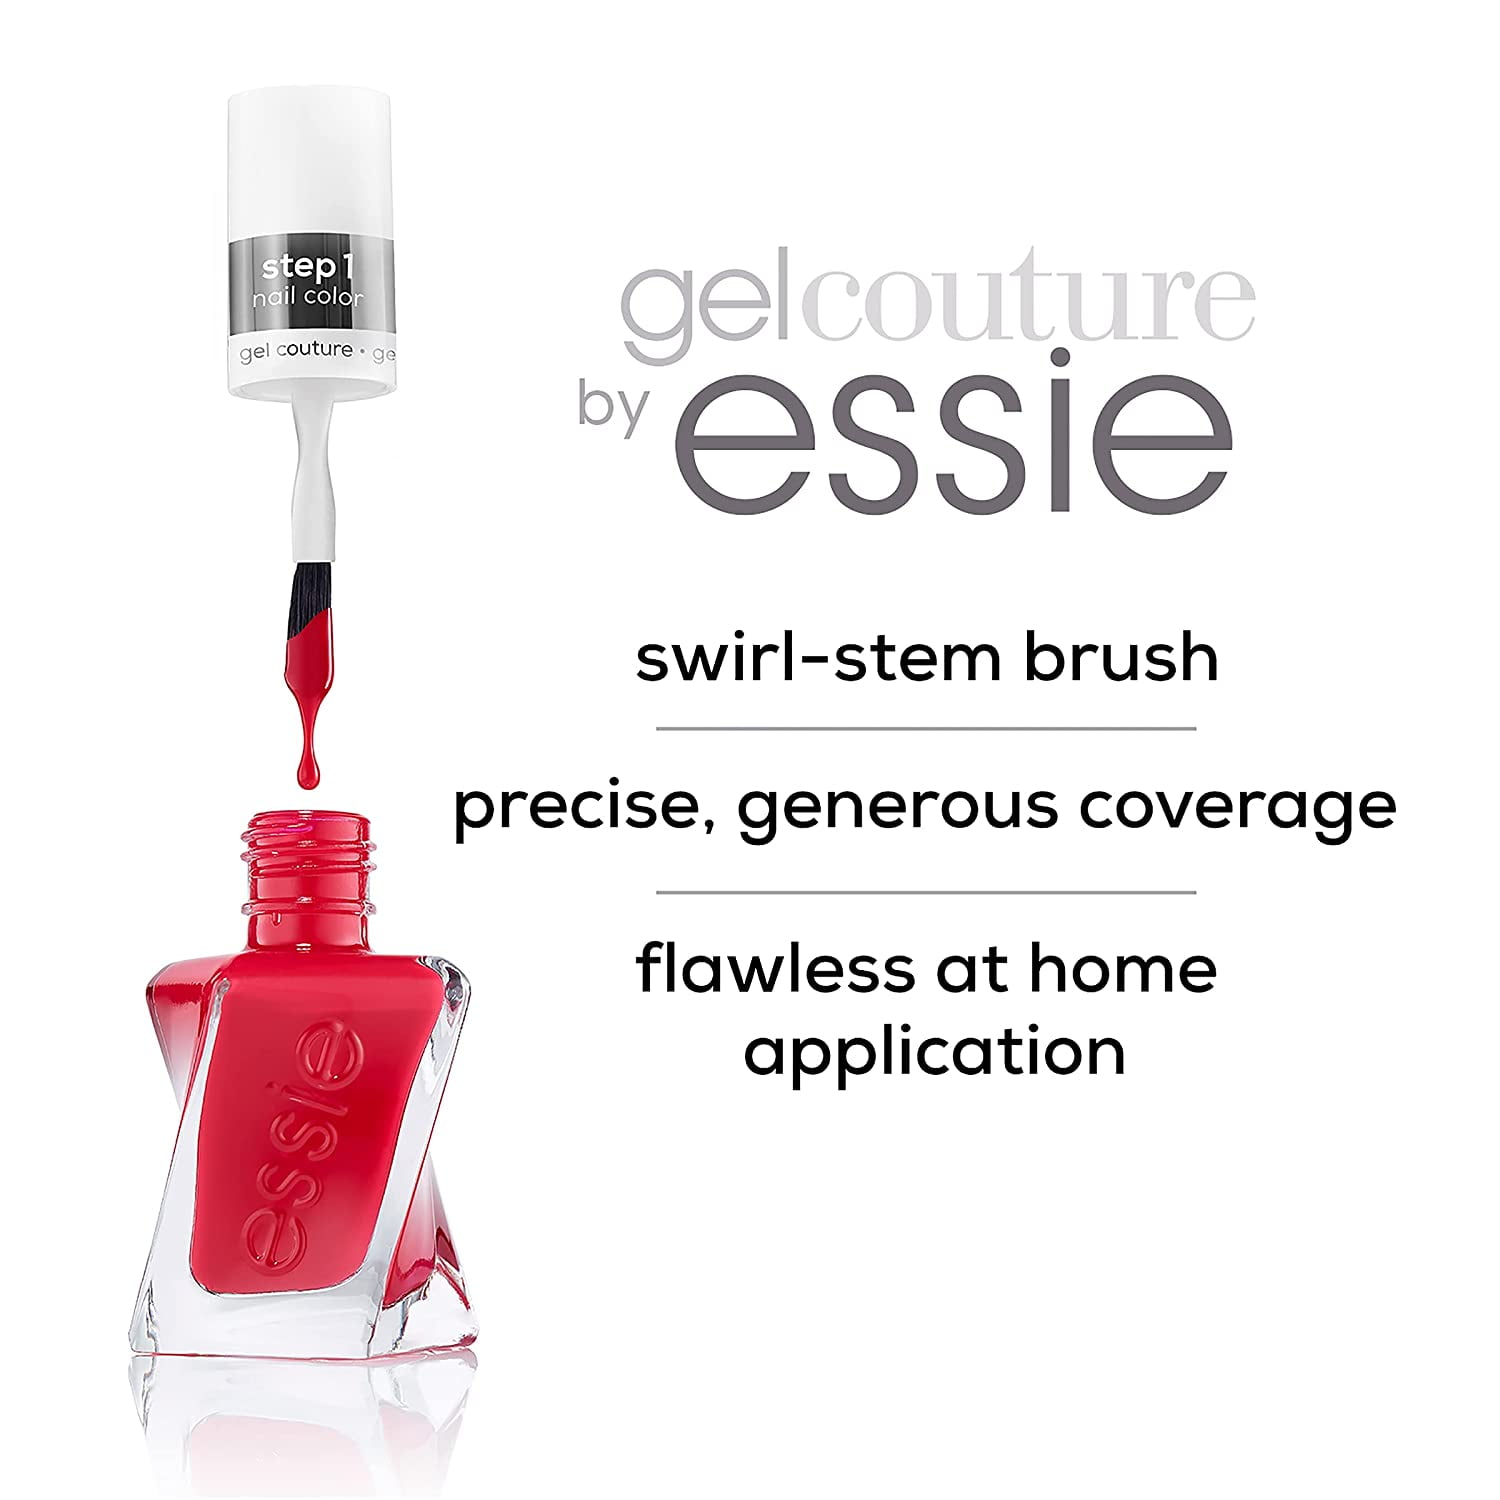 Essie gel sellers runway, color coat,, kit 3 nail the jitters, pre-show - longwear featuring couture holiday limited 1 gel couture rock gift top and set, piece best new mini edition